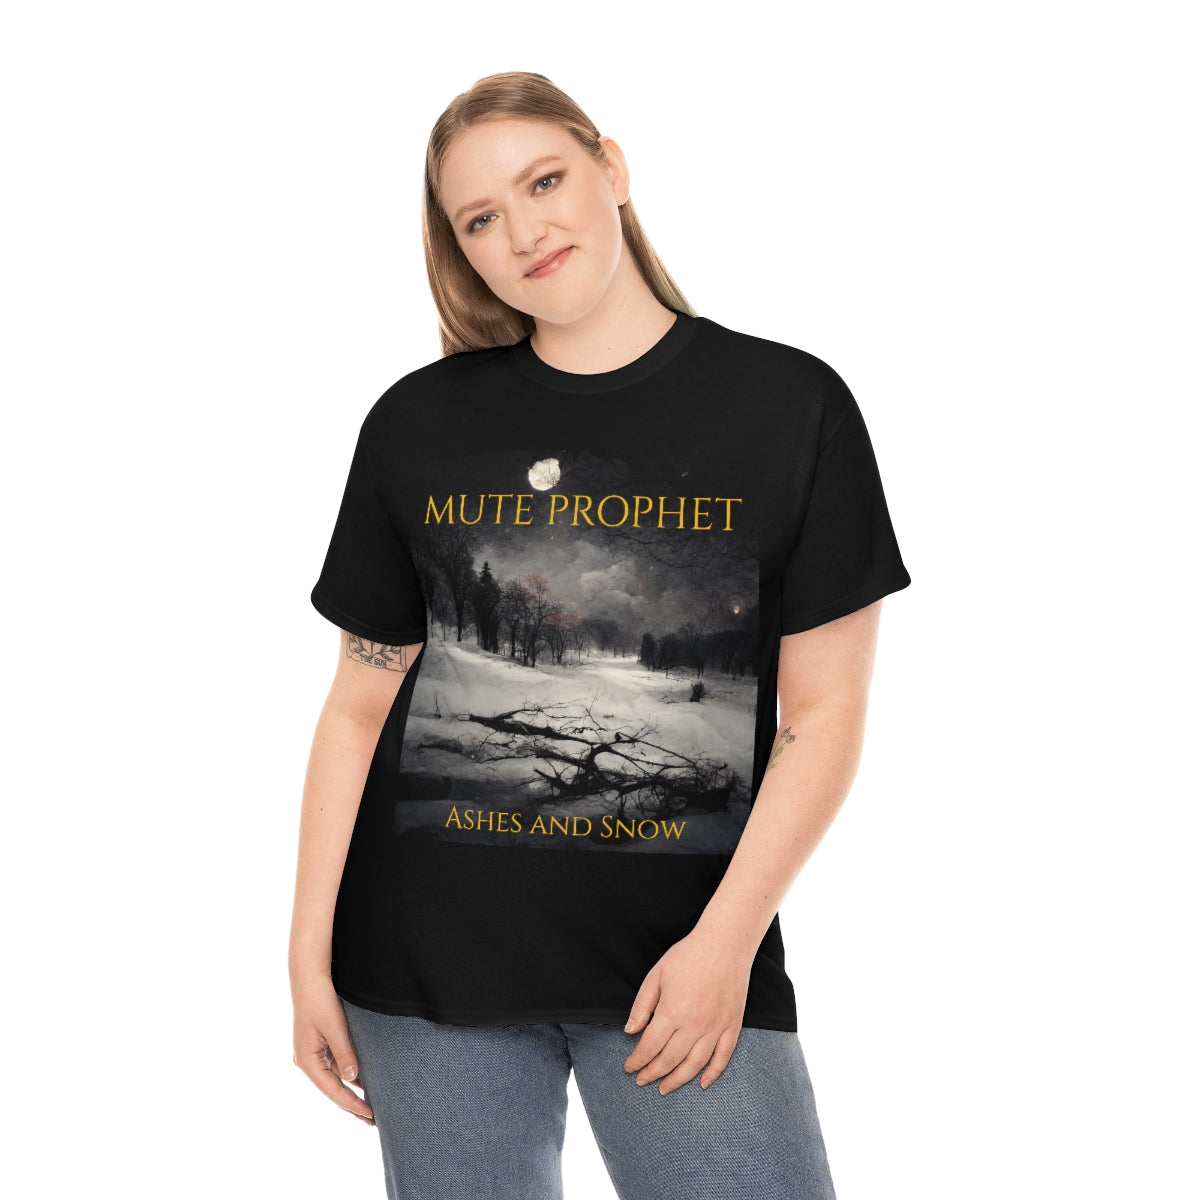 "Ashes and Snow" T-Shirt